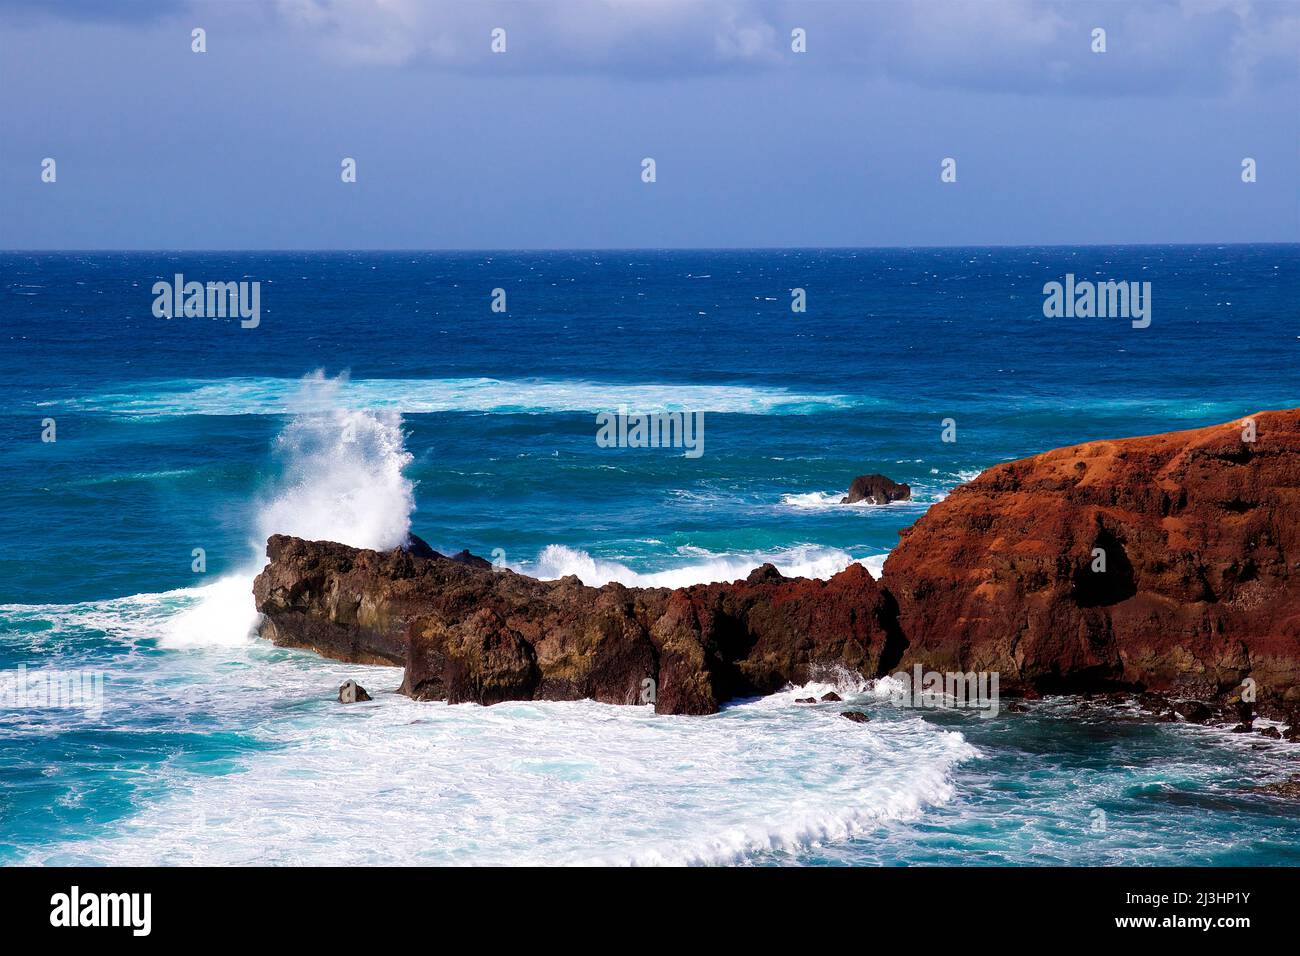 Canary Islands, Lanzarote, volcanic island, west coast, crater lake, Charco de los Clicos, lava rocks red, volcanic lake green, sky blue, clouds white, surf waves, sea blue, foaming spray Stock Photo